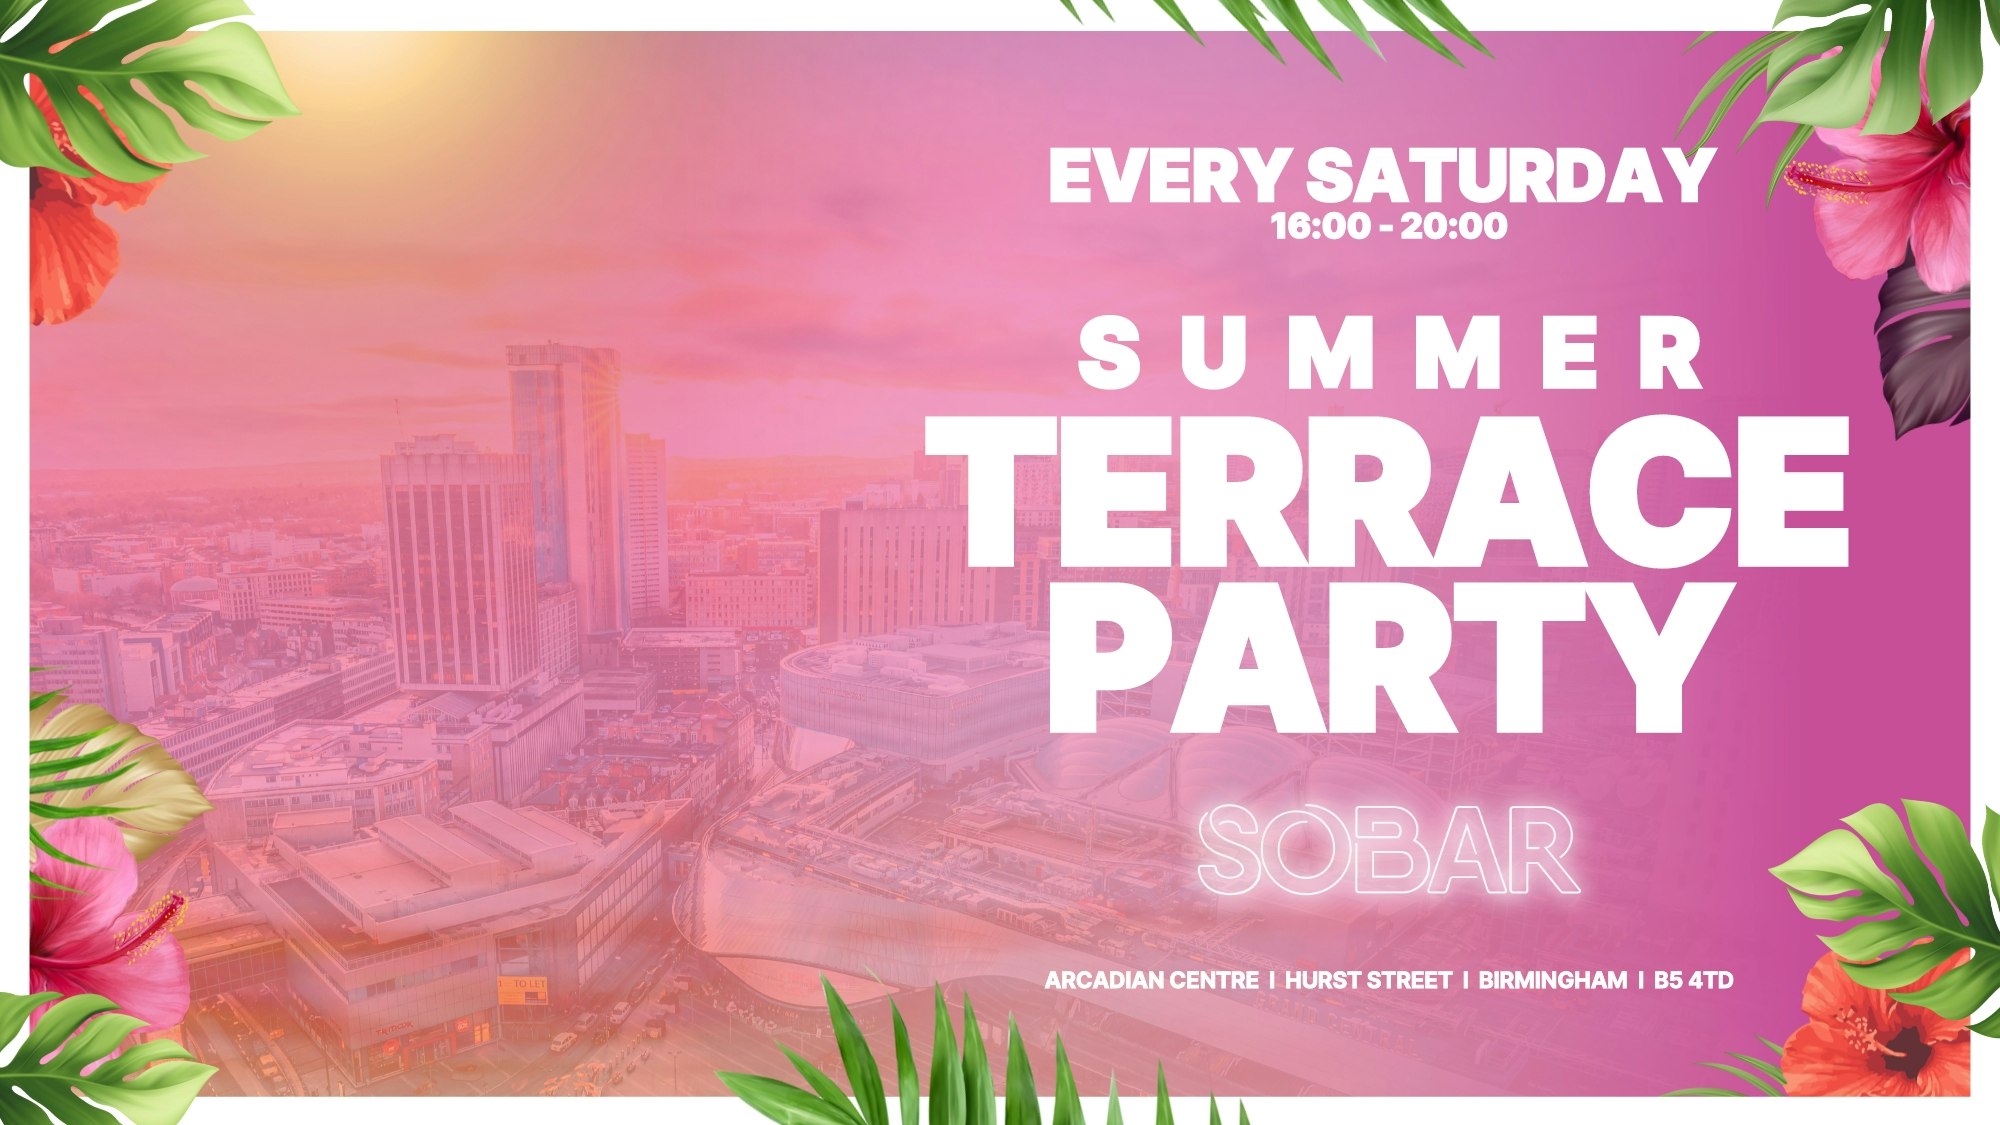 SOBAR TERRACE DAY PARTY